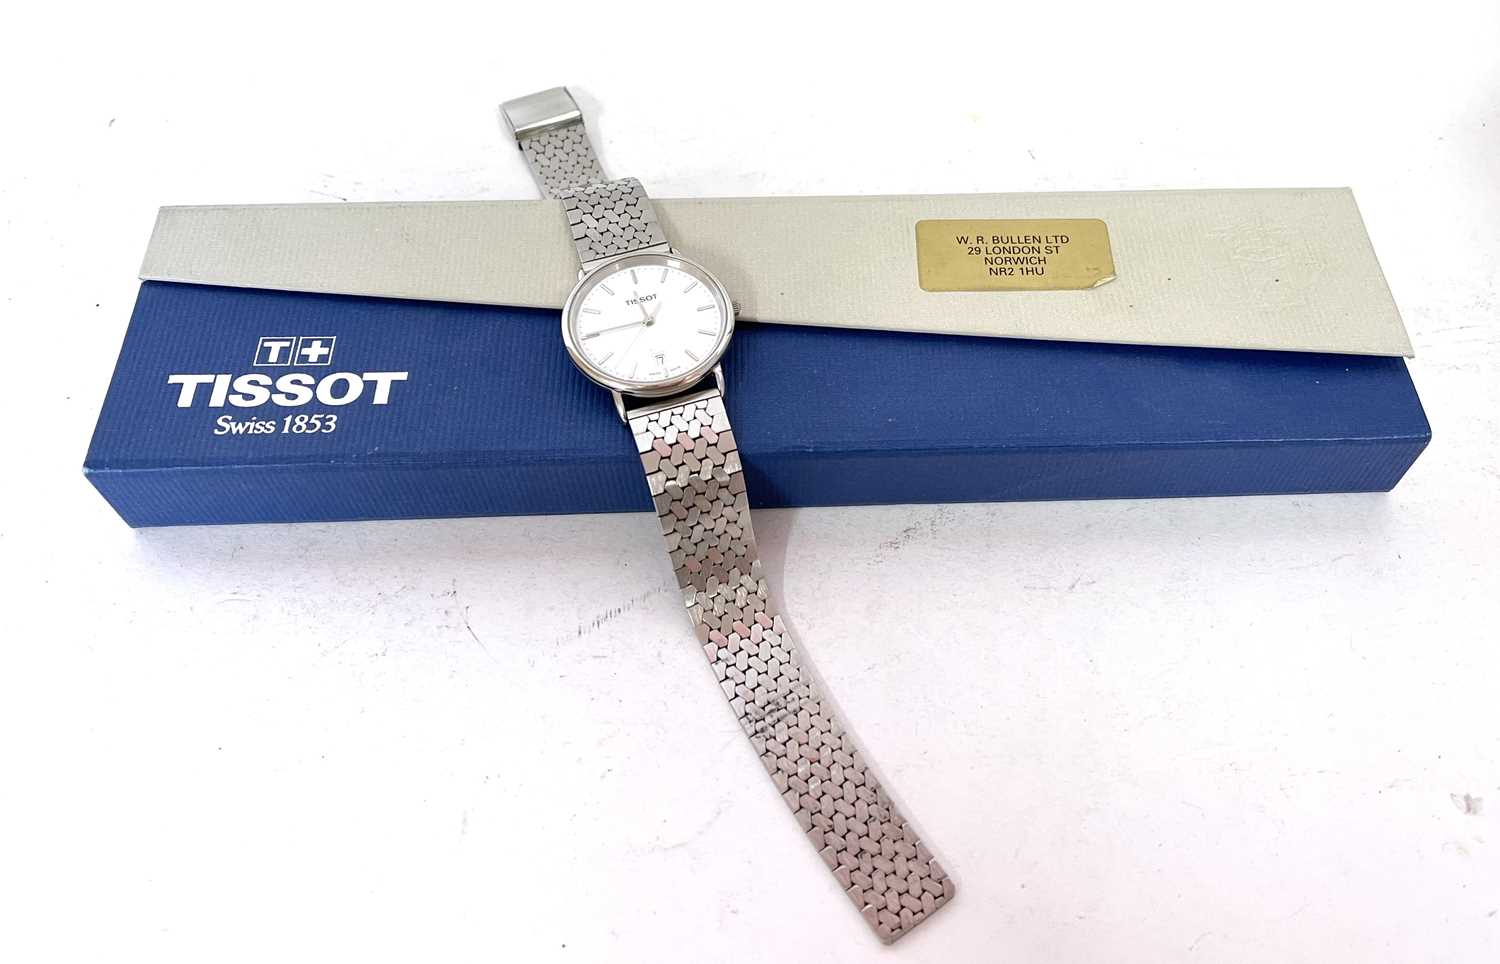 A stainless steel gents Tissot quartz wrist watch with original box and international guarantee - Image 2 of 3